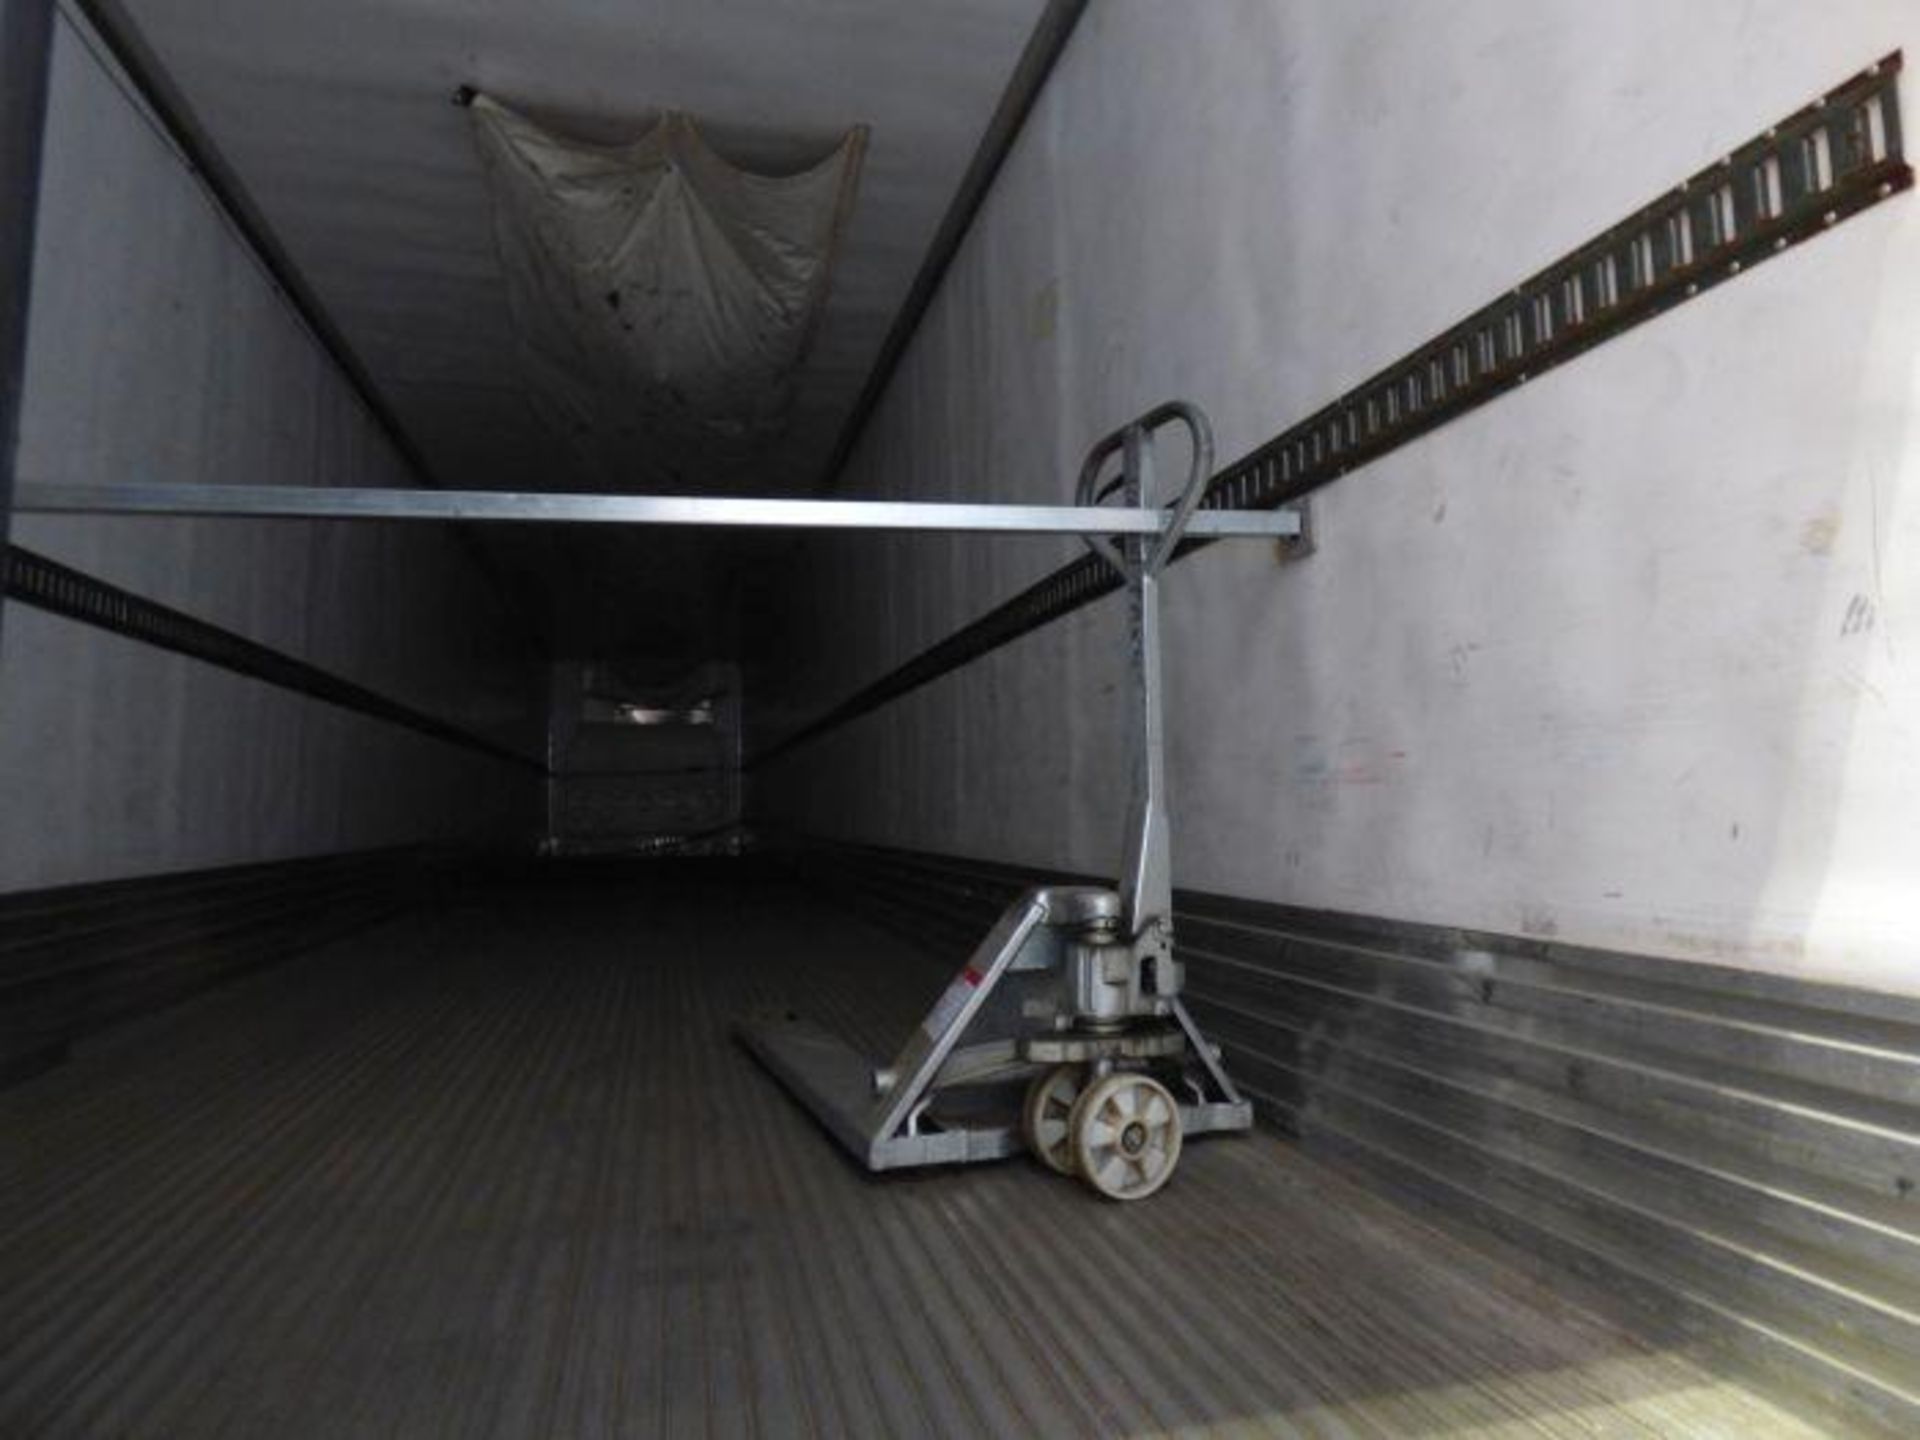 2013 Utility Reefer Trailer, 53 Foot - Image 12 of 12